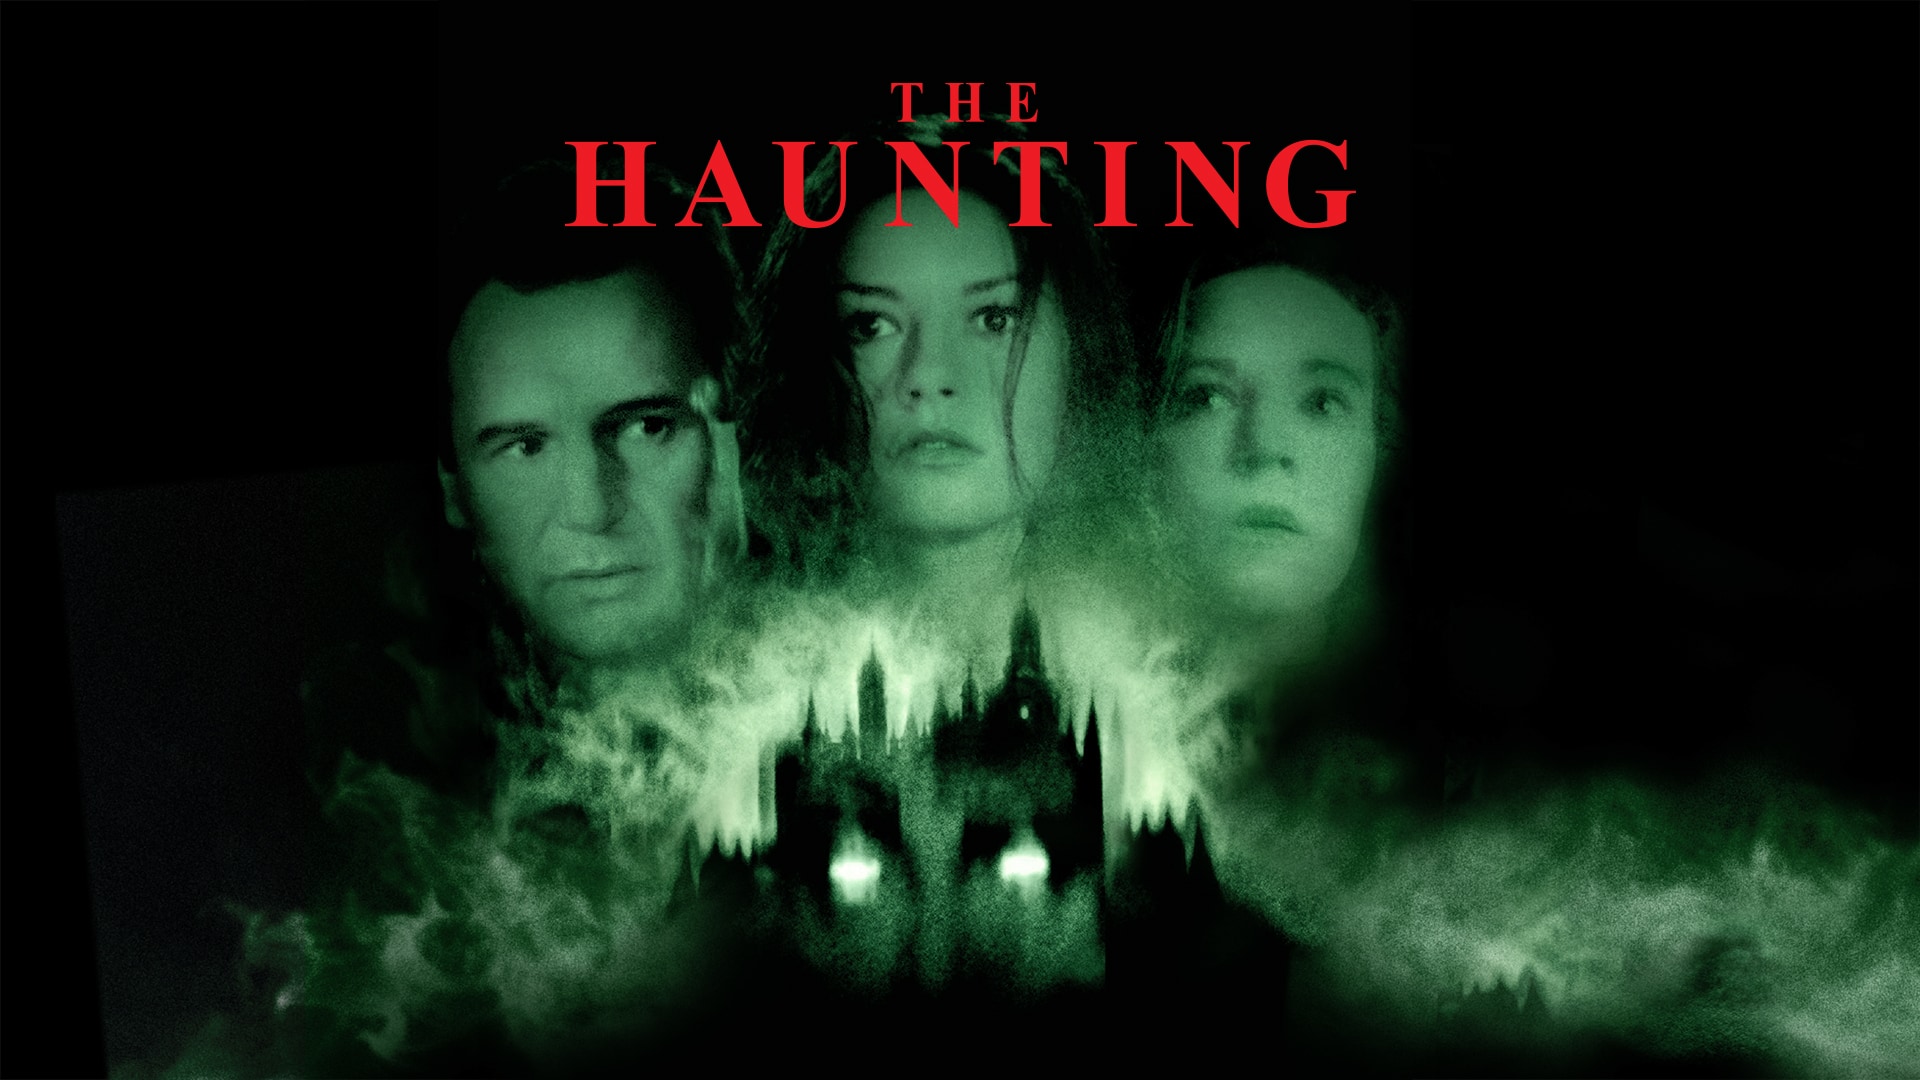 Watch The Haunting Online | Stream Full Movies